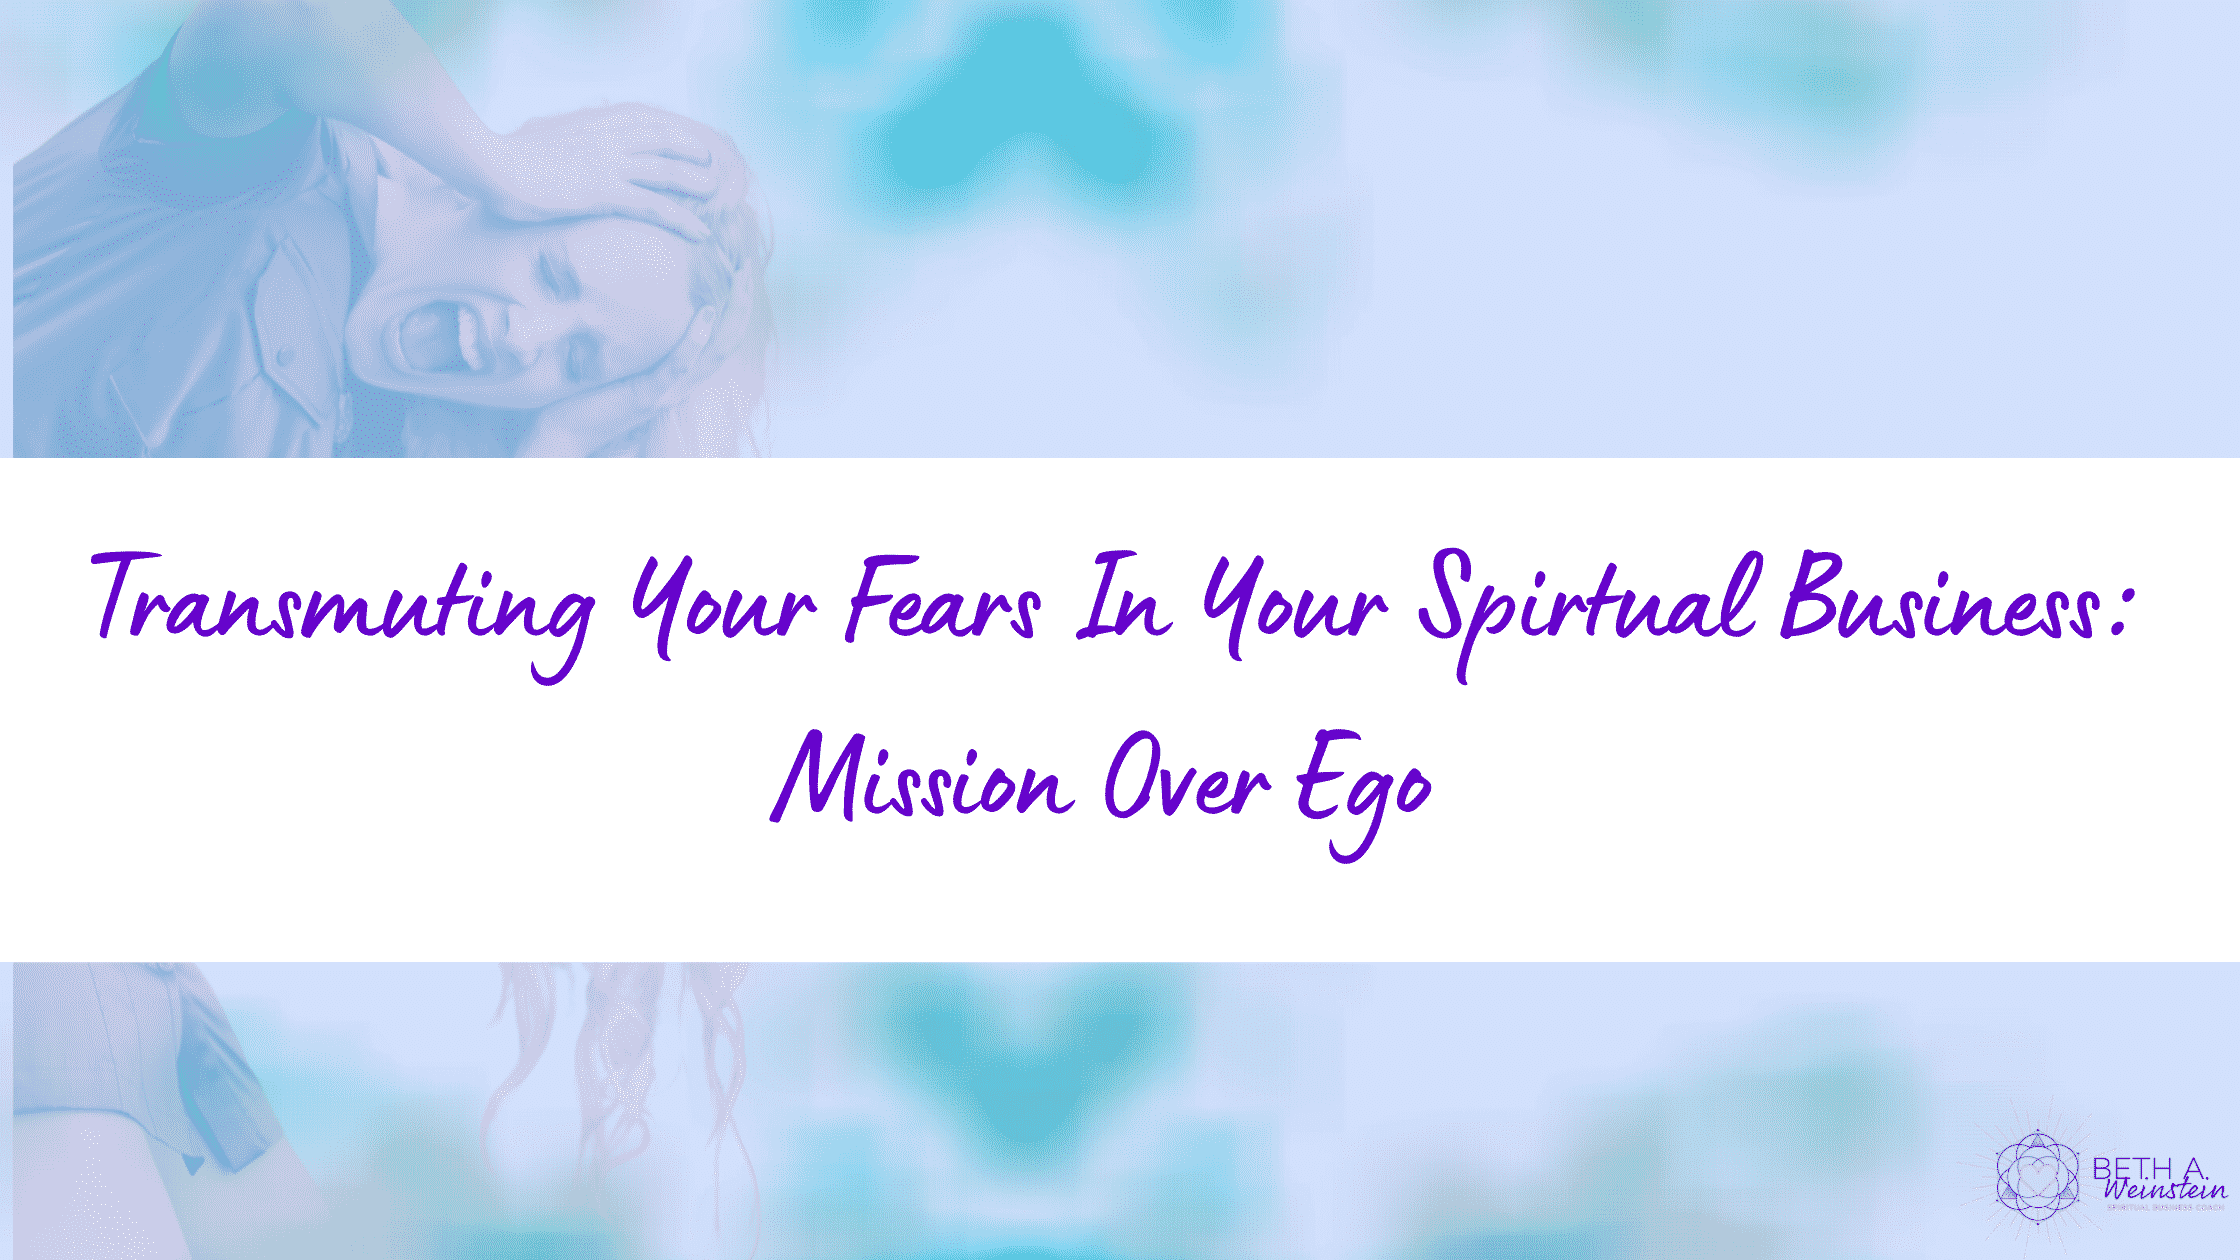 Transmuting Your Fears in Your Spiritual Business:  Mission Over Ego